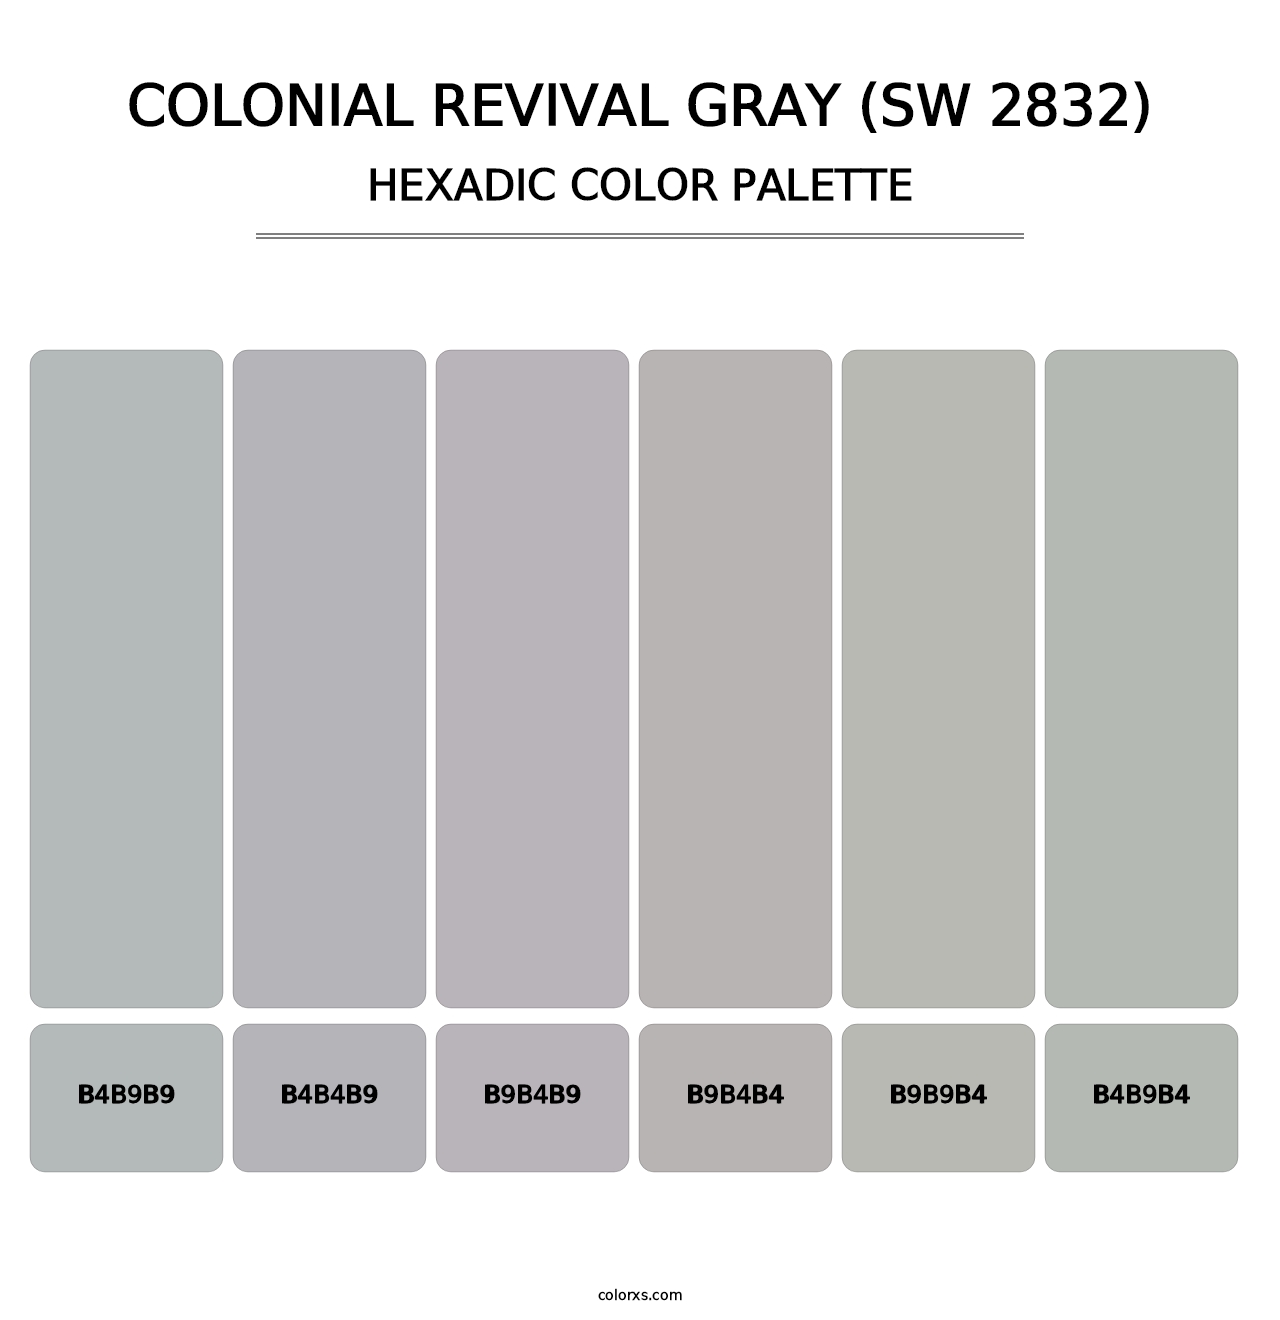 Colonial Revival Gray (SW 2832) - Hexadic Color Palette